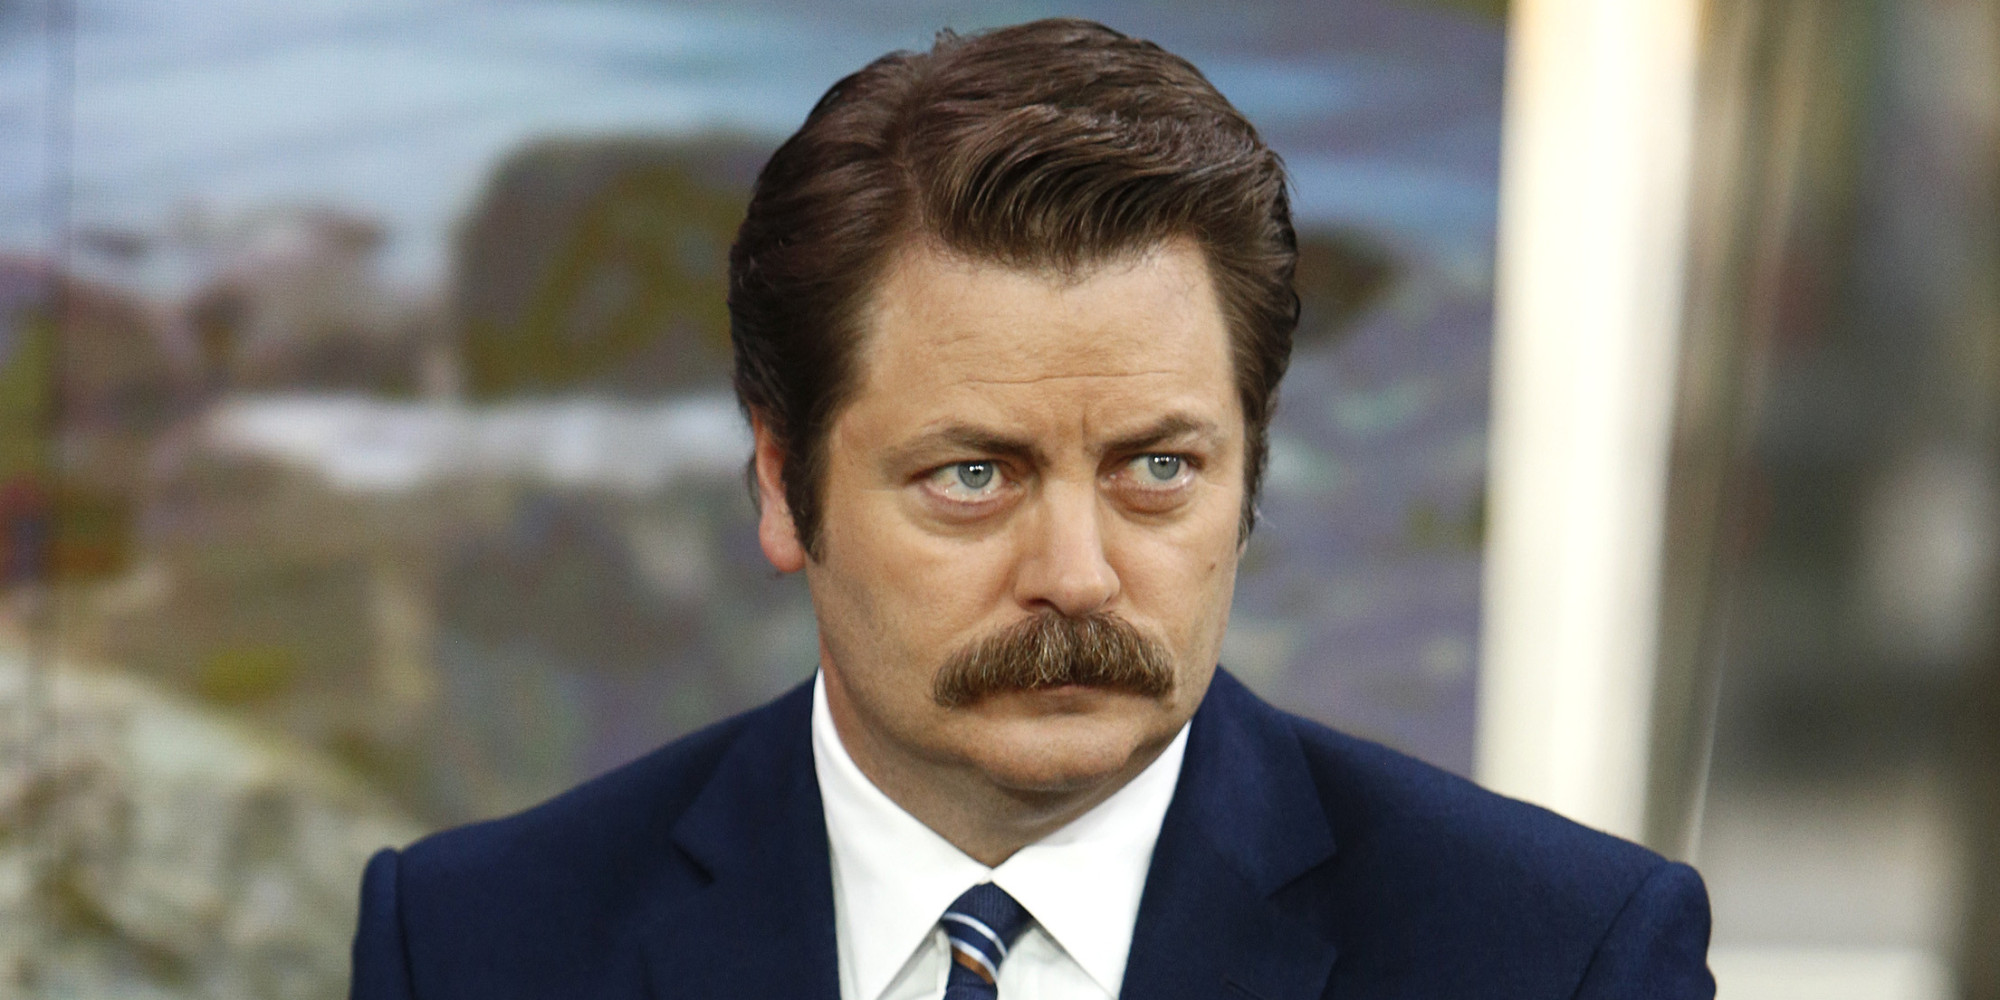 Nick Offerman Backgrounds, Compatible - PC, Mobile, Gadgets| 2000x1000 px